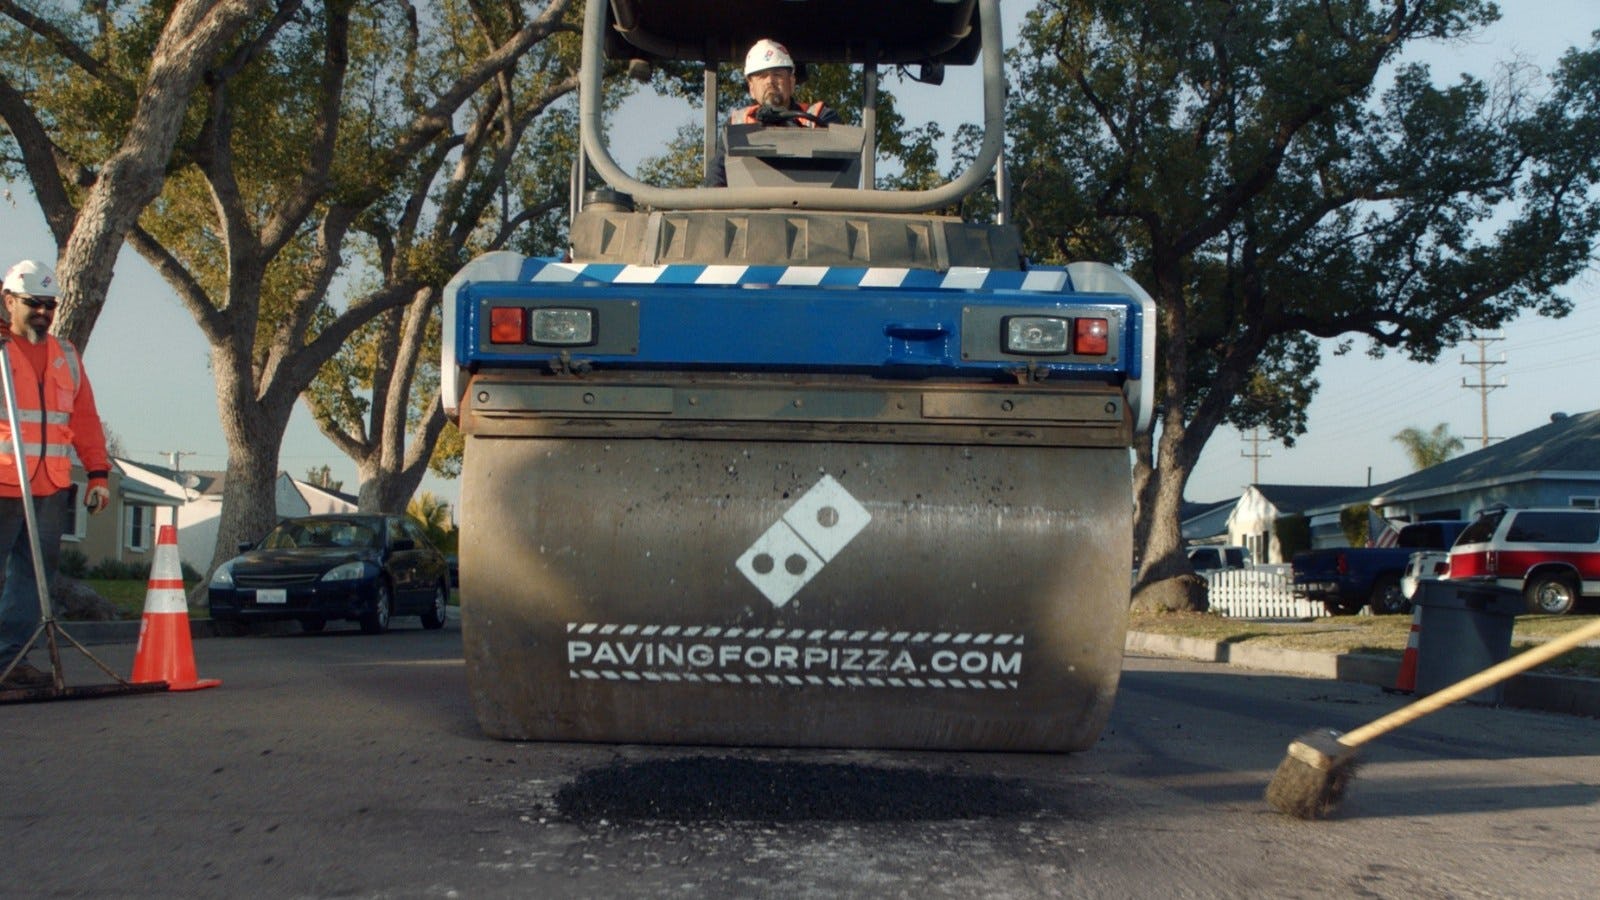 Customers interested in nominating their town for a paving grant from Dominos can enter the zip code at pavingforpizza.com. If their town is selected, the customer will be notified and the city will receive funds to help repair roads so pizzas make it home safely. (PRNewsfoto/Domino's Pizza)